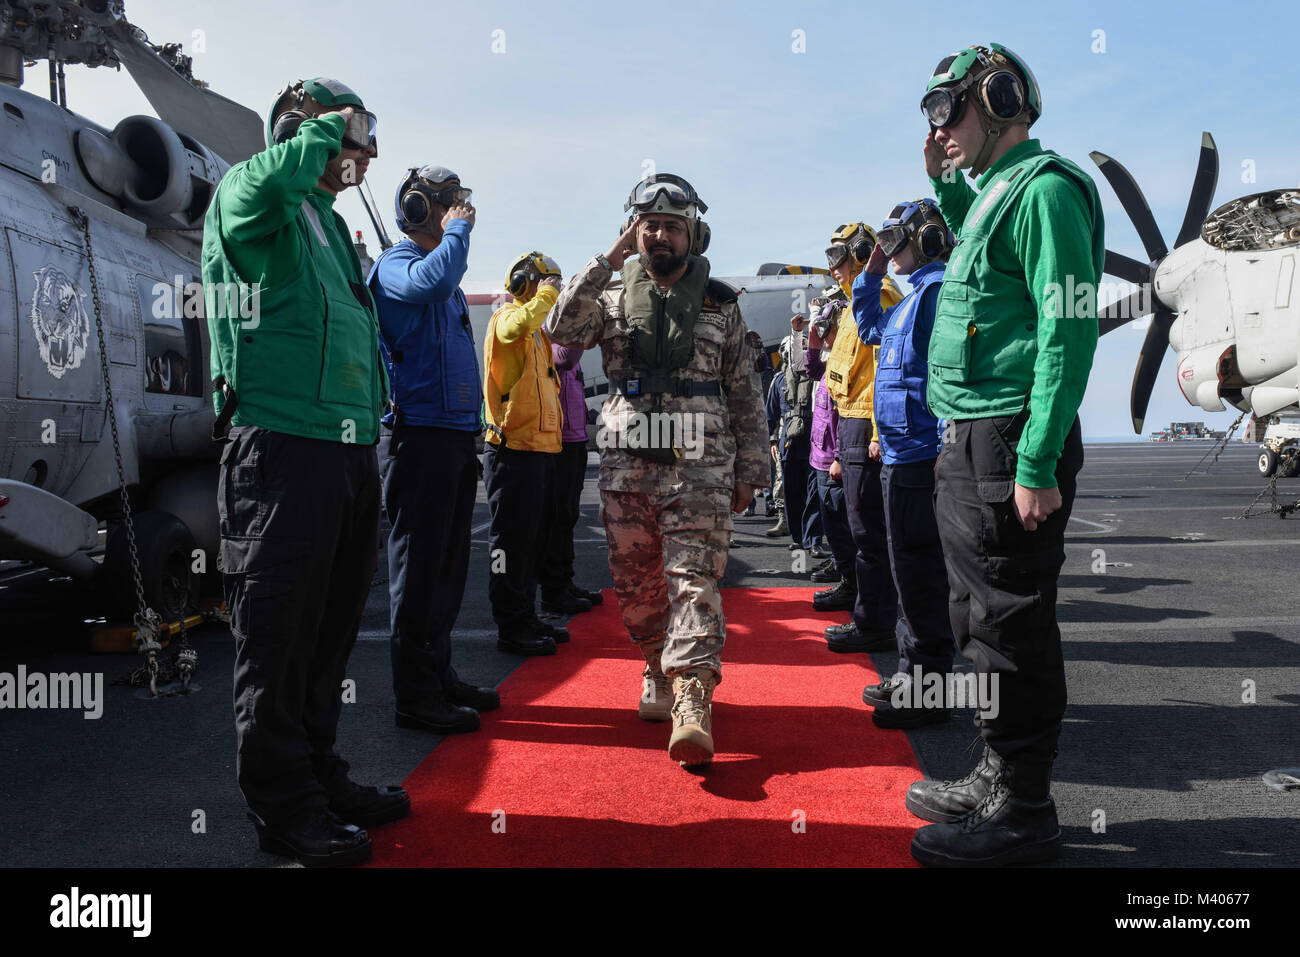 180206-N-GP724-1042 ARABIAN GULF (Feb. 6, 2018) Sideboys render honors to Qatar Emiri Naval Forces Maj. Gen. Abdullah Hassan Al-Sulaiti on the flight deck of the aircraft carrier USS Theodore Roosevelt (CVN 71). Theodore Roosevelt and its carrier strike group are deployed to the U.S. 5th Fleet area of operations in support of maritime security operations to reassure allies and partners and preserve the freedom of navigation and the free flow of commerce in the region. (U.S. Navy photo by Mass Communication Specialist 3rd Class Alex Perlman/Released) Stock Photo